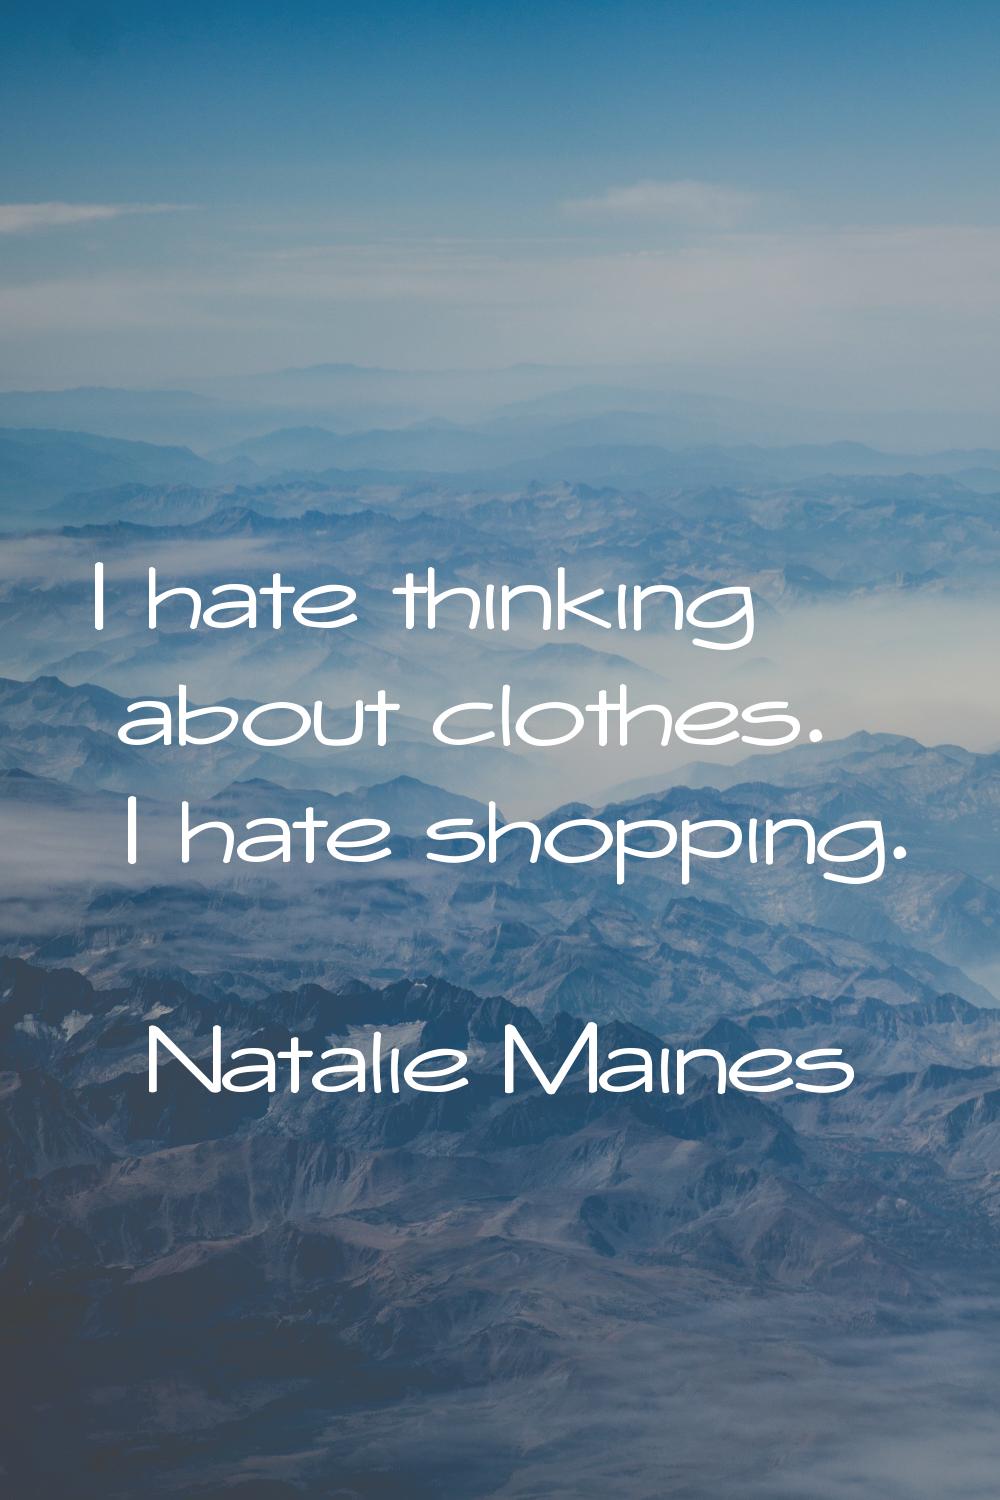 I hate thinking about clothes. I hate shopping.